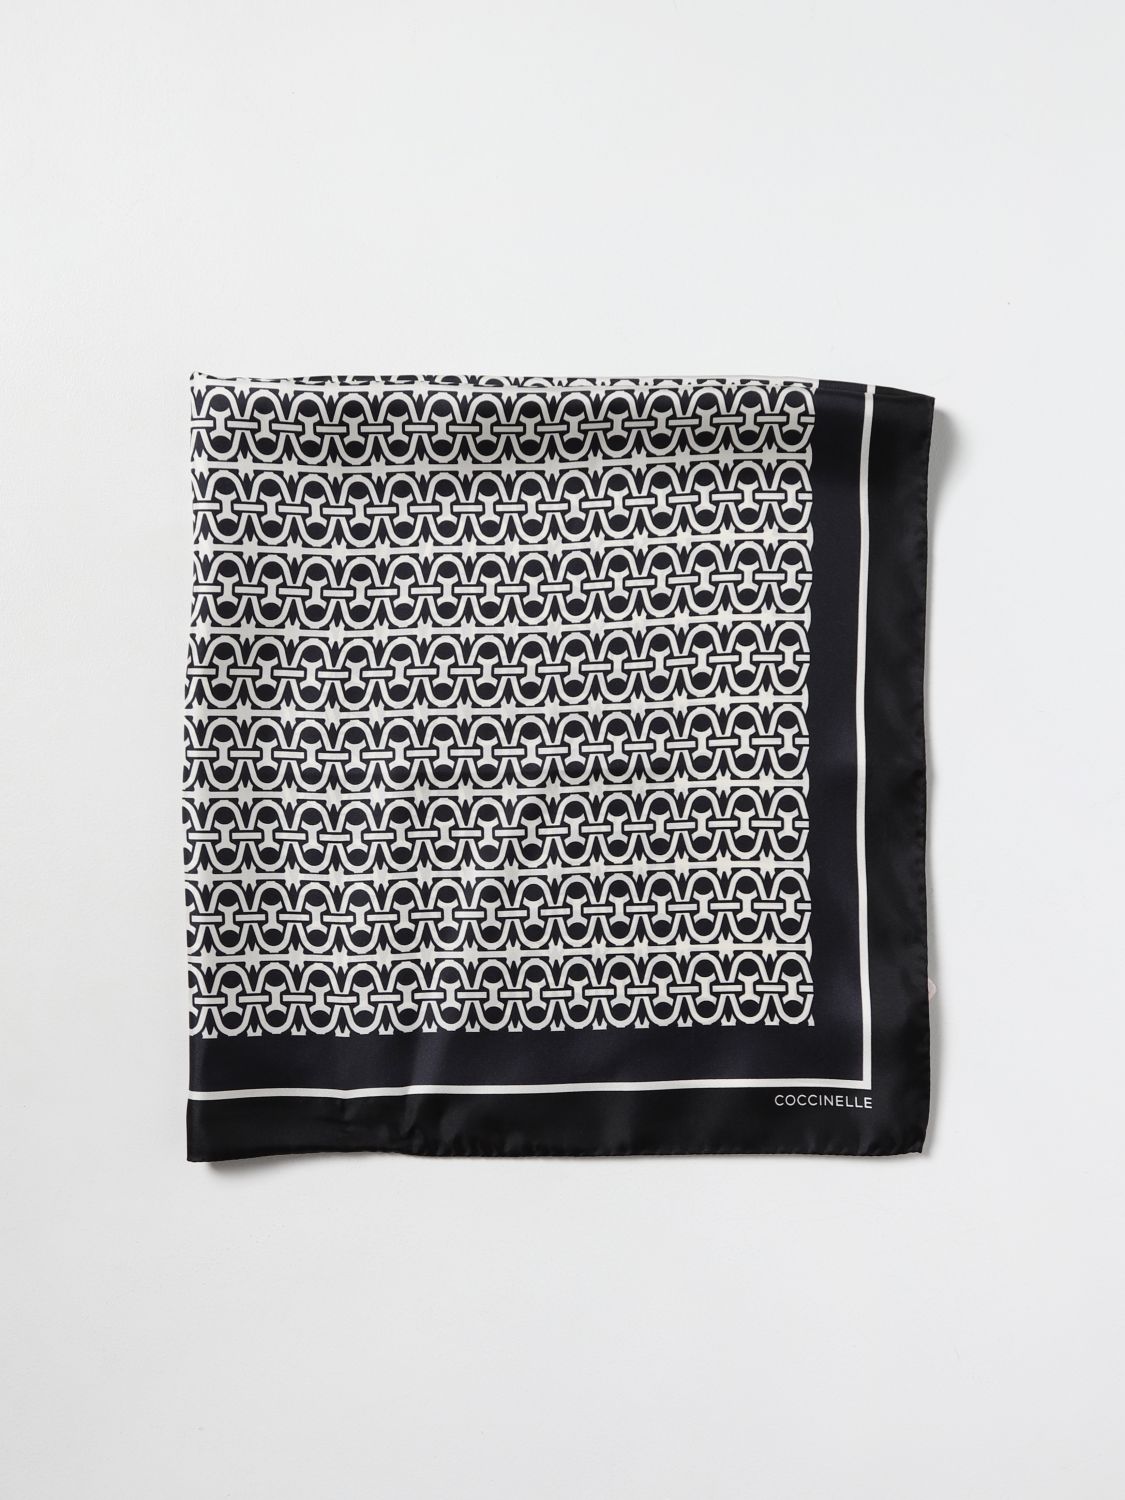 COCCINELLE: neck scarf for woman - Black | Coccinelle neck scarf ...